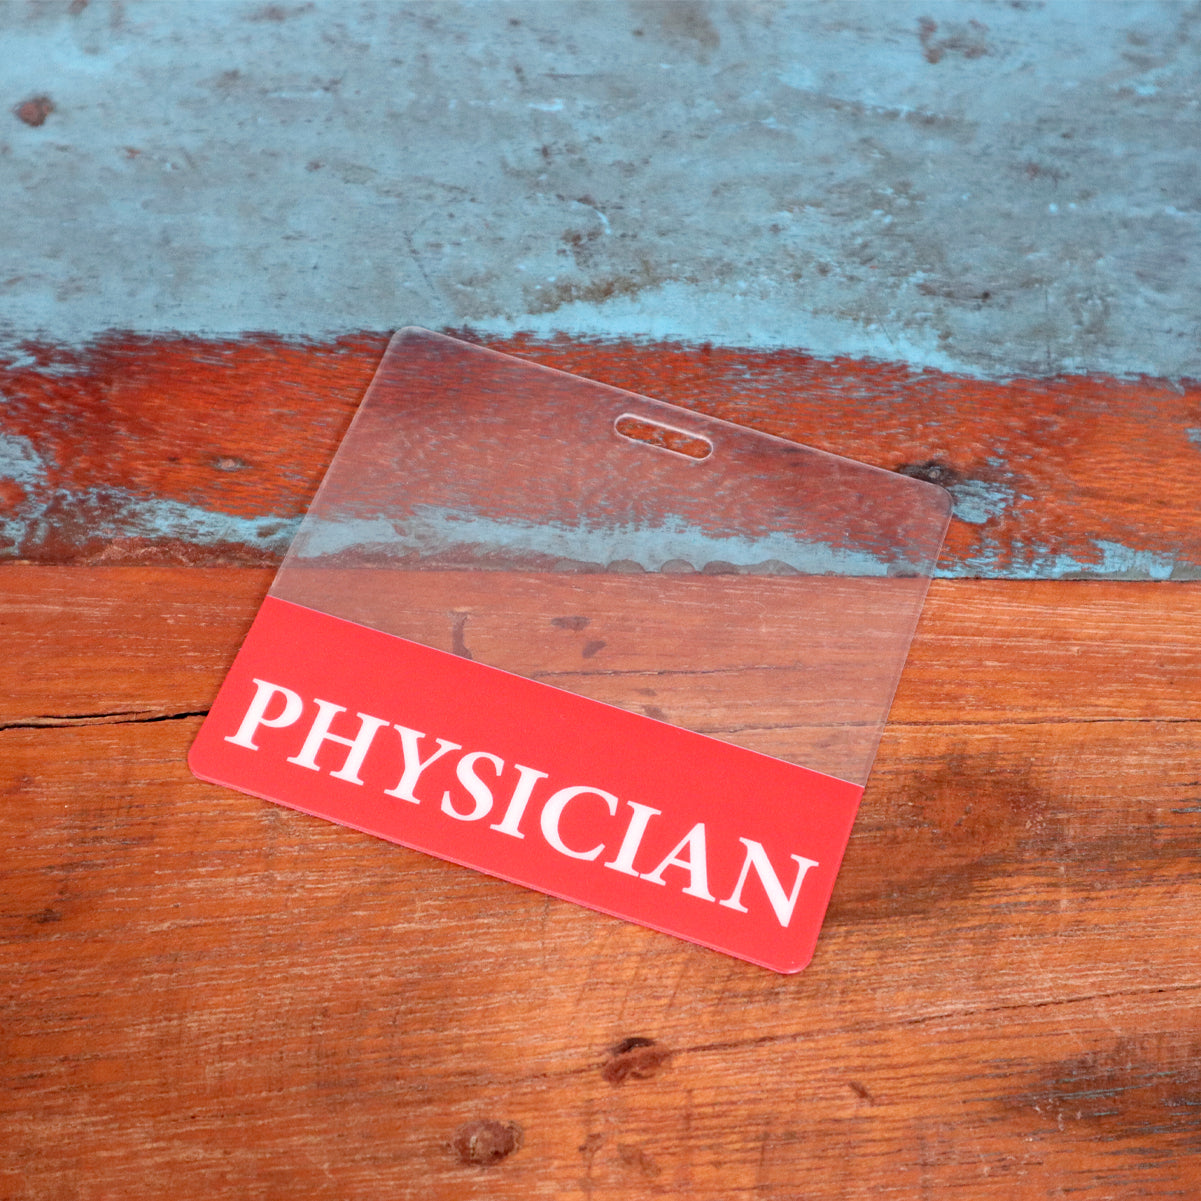 A Clear PHYSICIAN Badge Buddy - Horizontal ID Badge Backer for Physicians - Double Sided Print with a red color border lies on a wooden surface with a blue background.